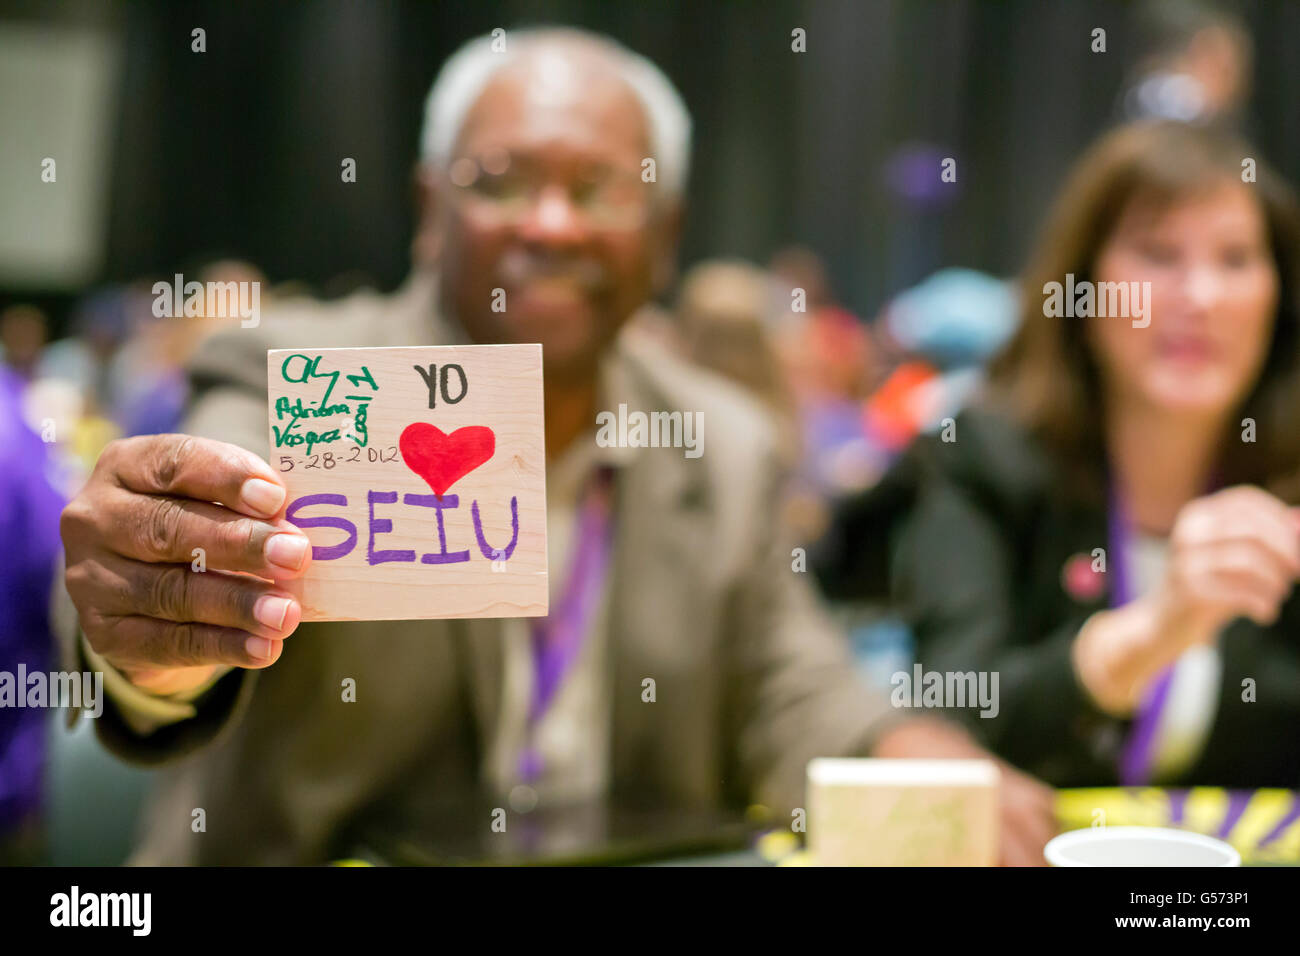 Detroit, Michigan - Delegates at the Service Employees International Union convention. Stock Photo